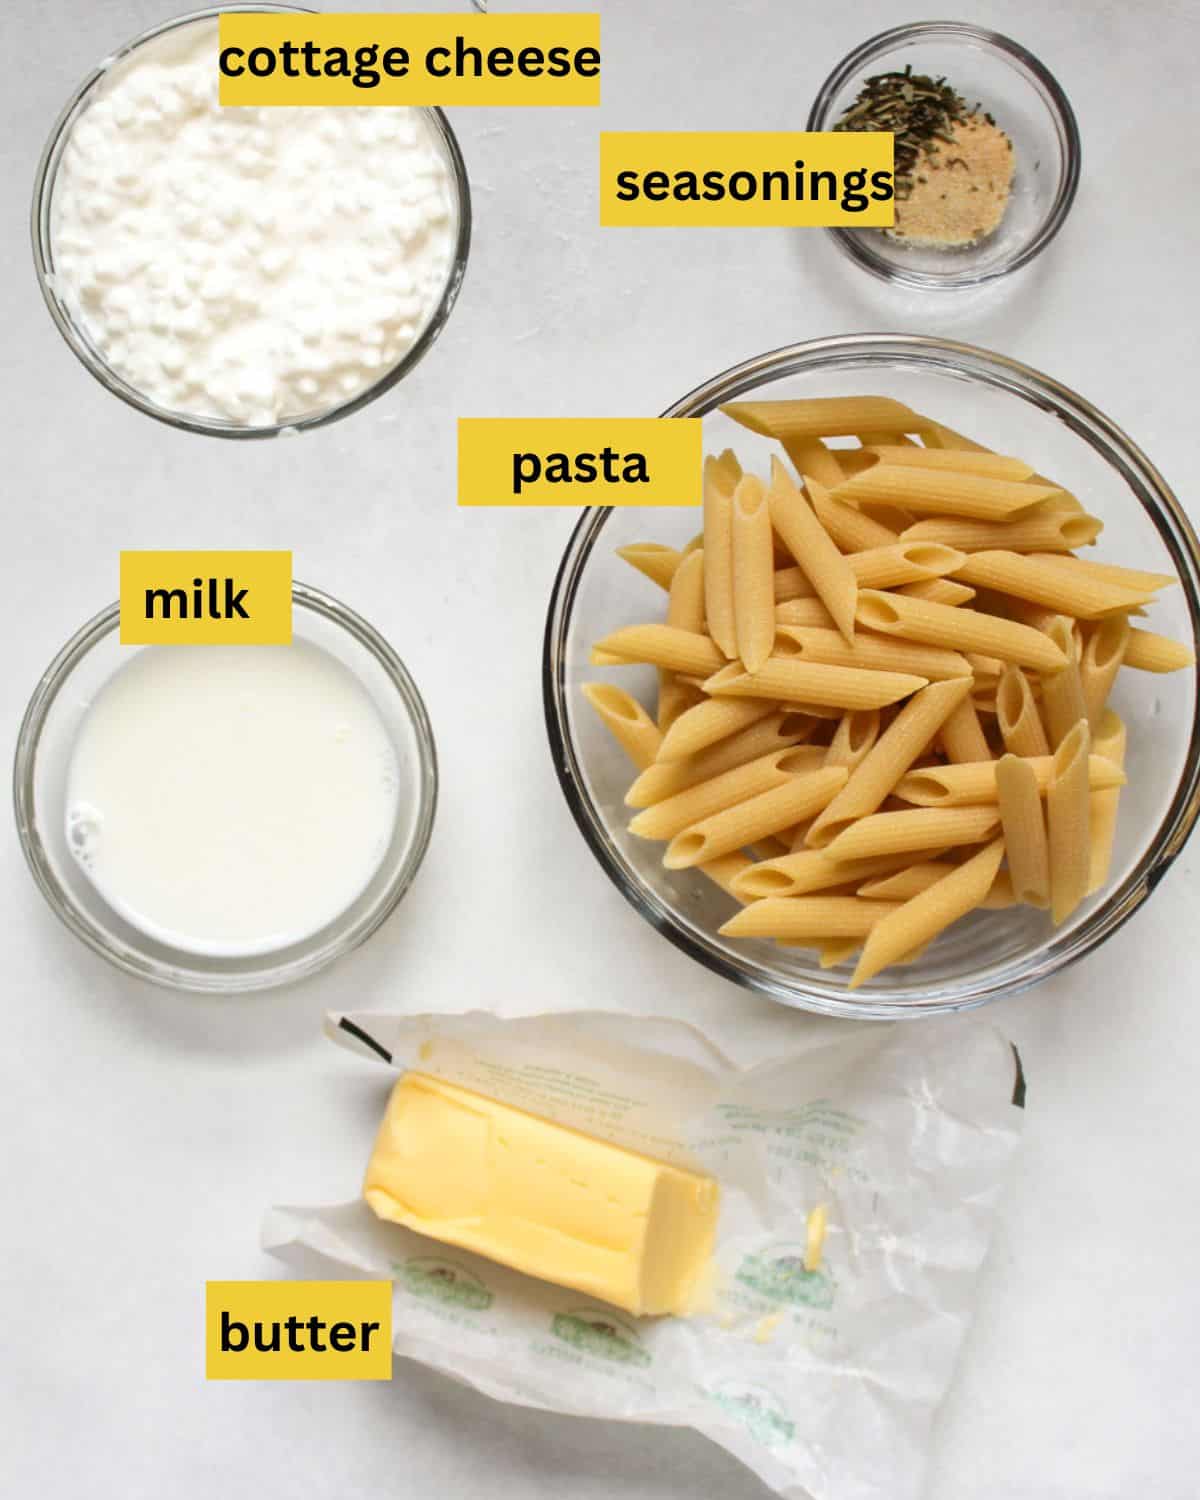 All the recipe ingredients neatly arranged on a white background, each labeled as cottage cheese, seasonings, milk, pasta. and butter.